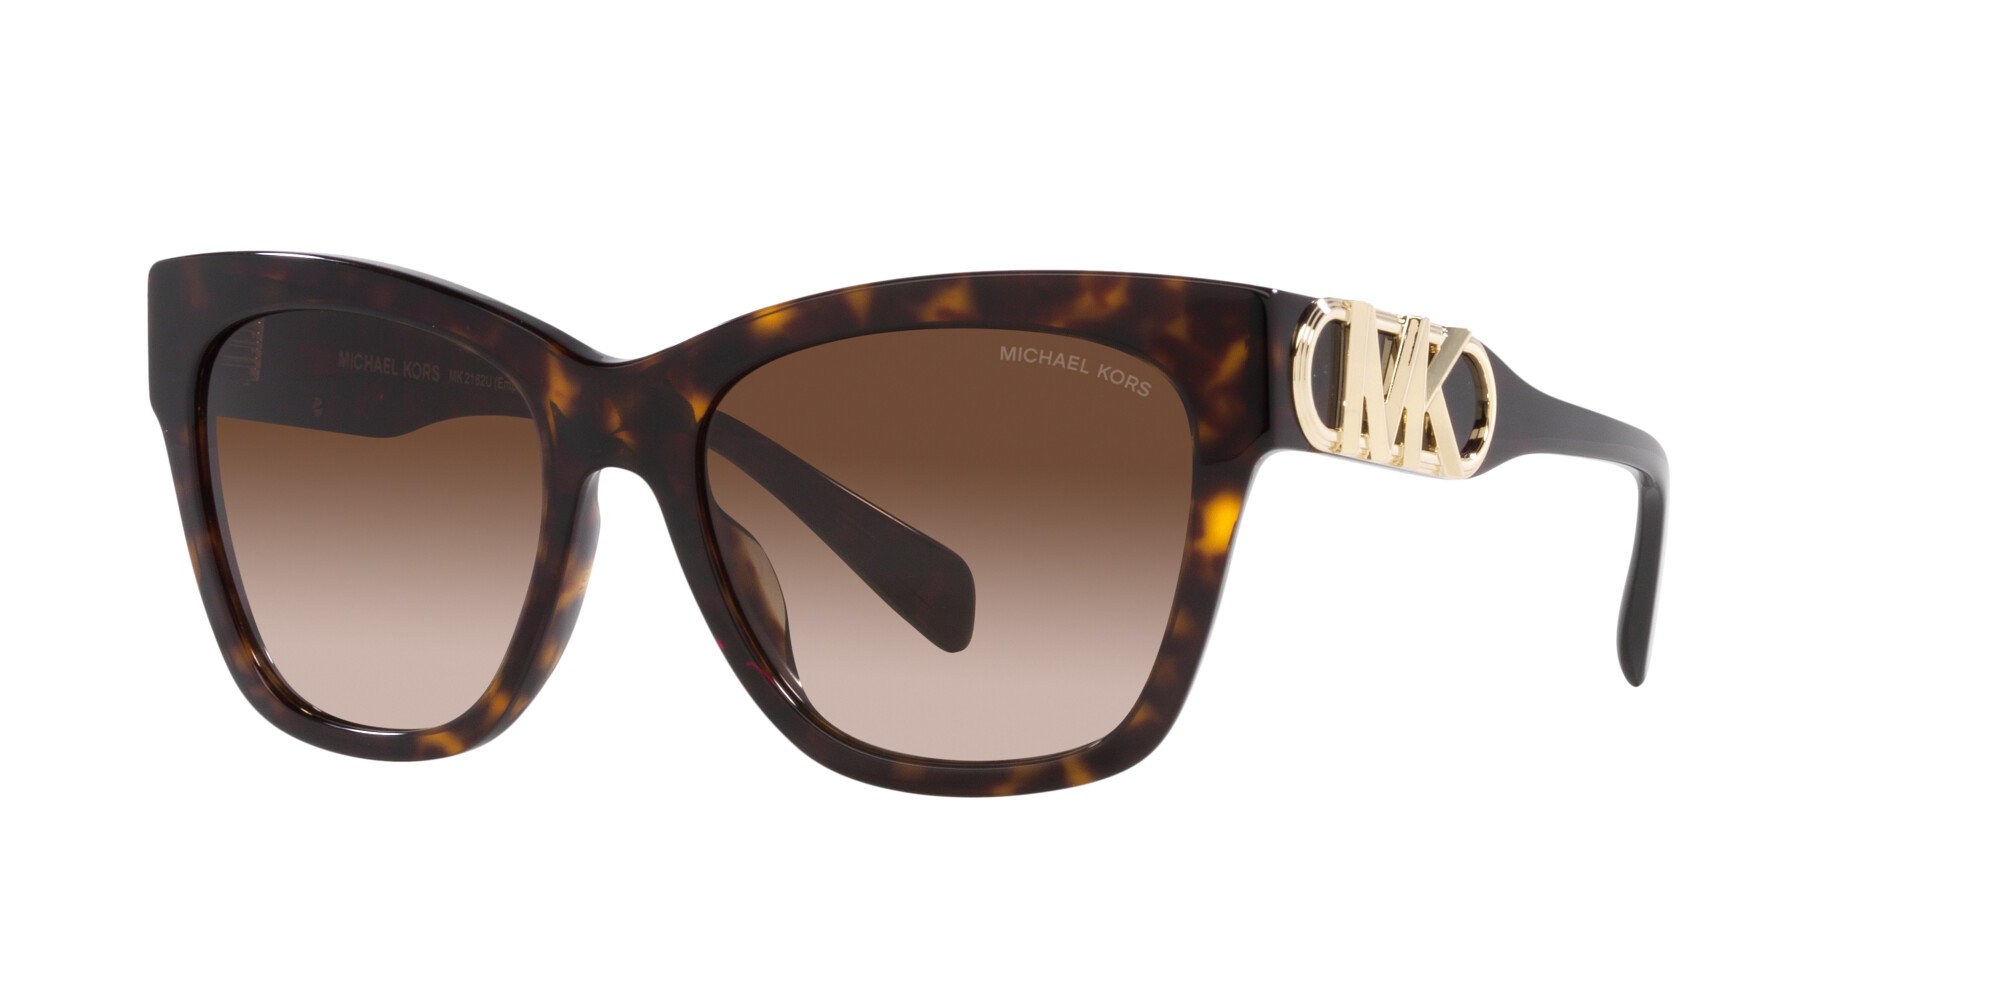 [products.image.angle_left01] Michael Kors EMPIRE SQUARE 0MK2182U 300613 Sonnenbrille